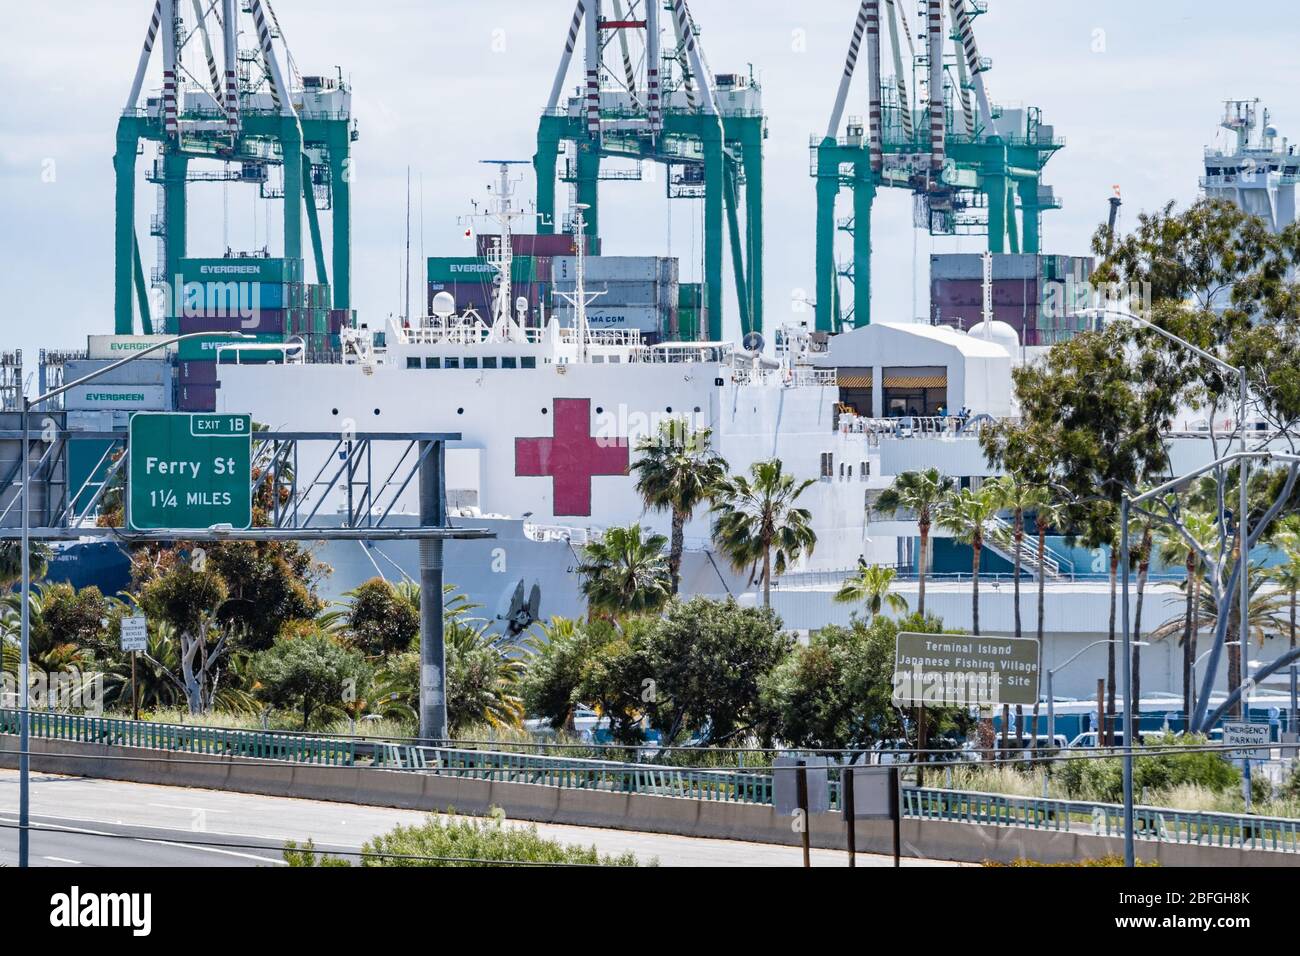 USNS Mercy navy hospital ship docked at Port of Los Angeles to help during Covid-19 crisis Stock Photo